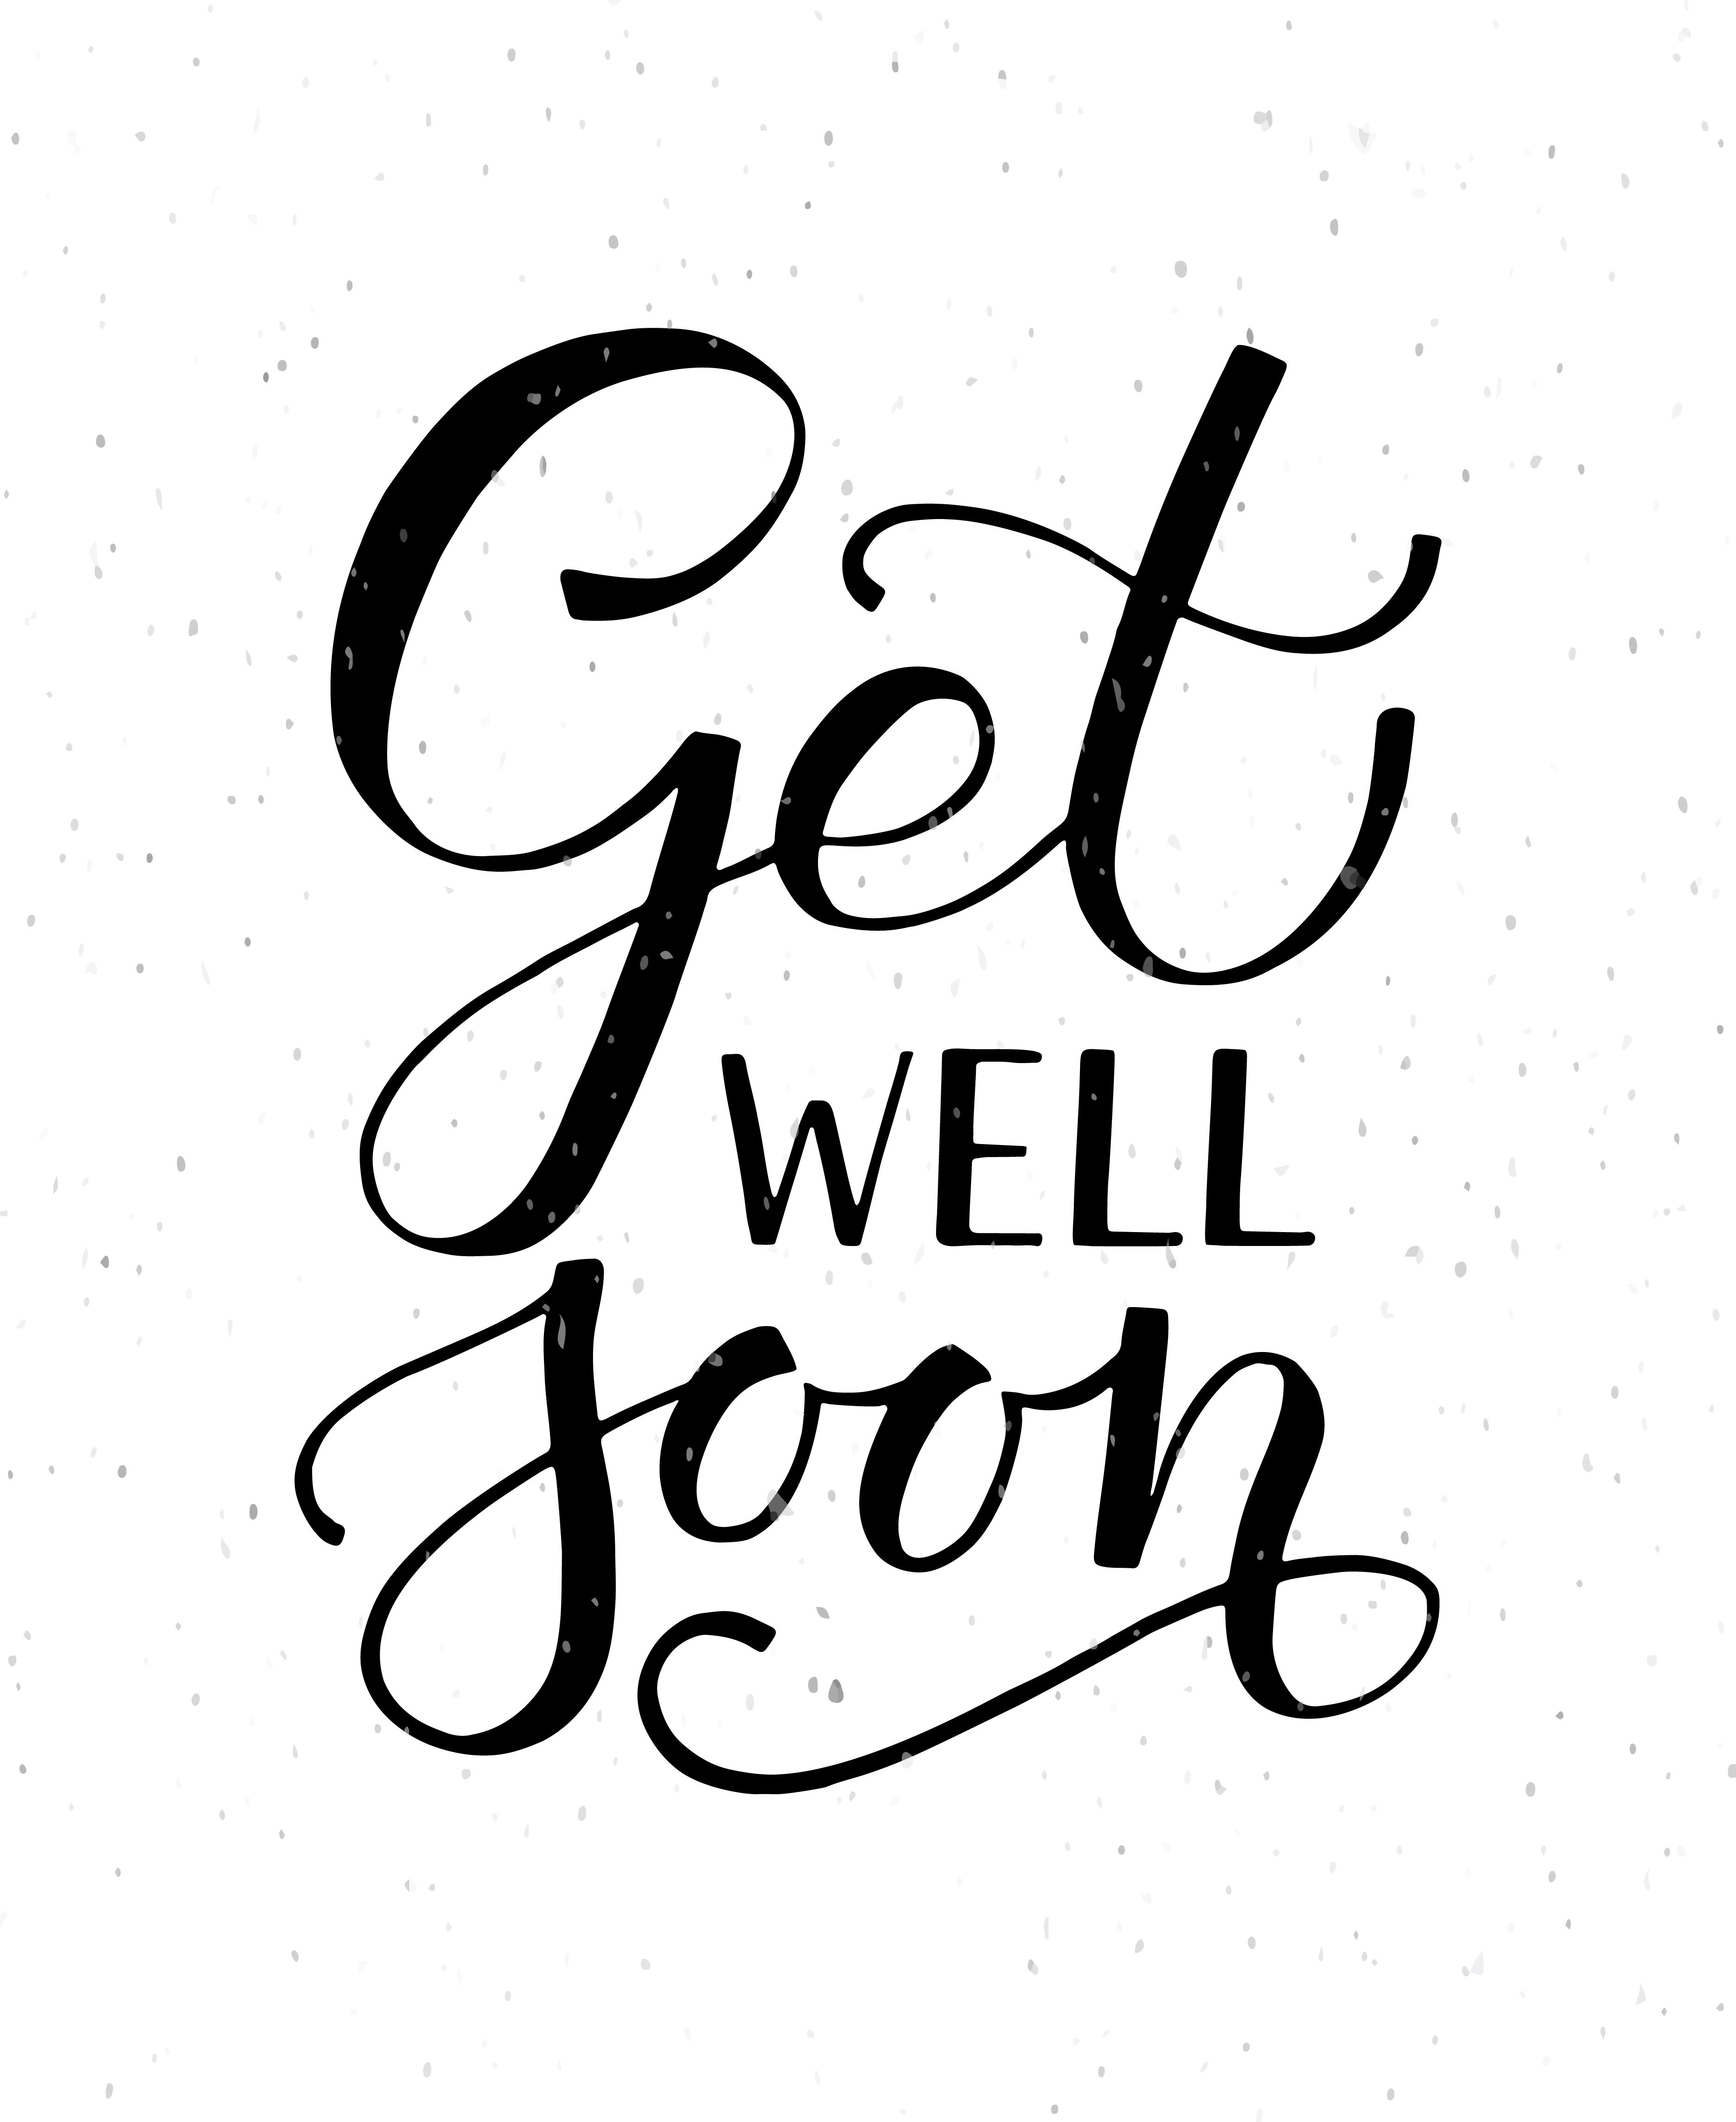 Get Well Soon Typography Cardalps View Art On For Get Well Card Template